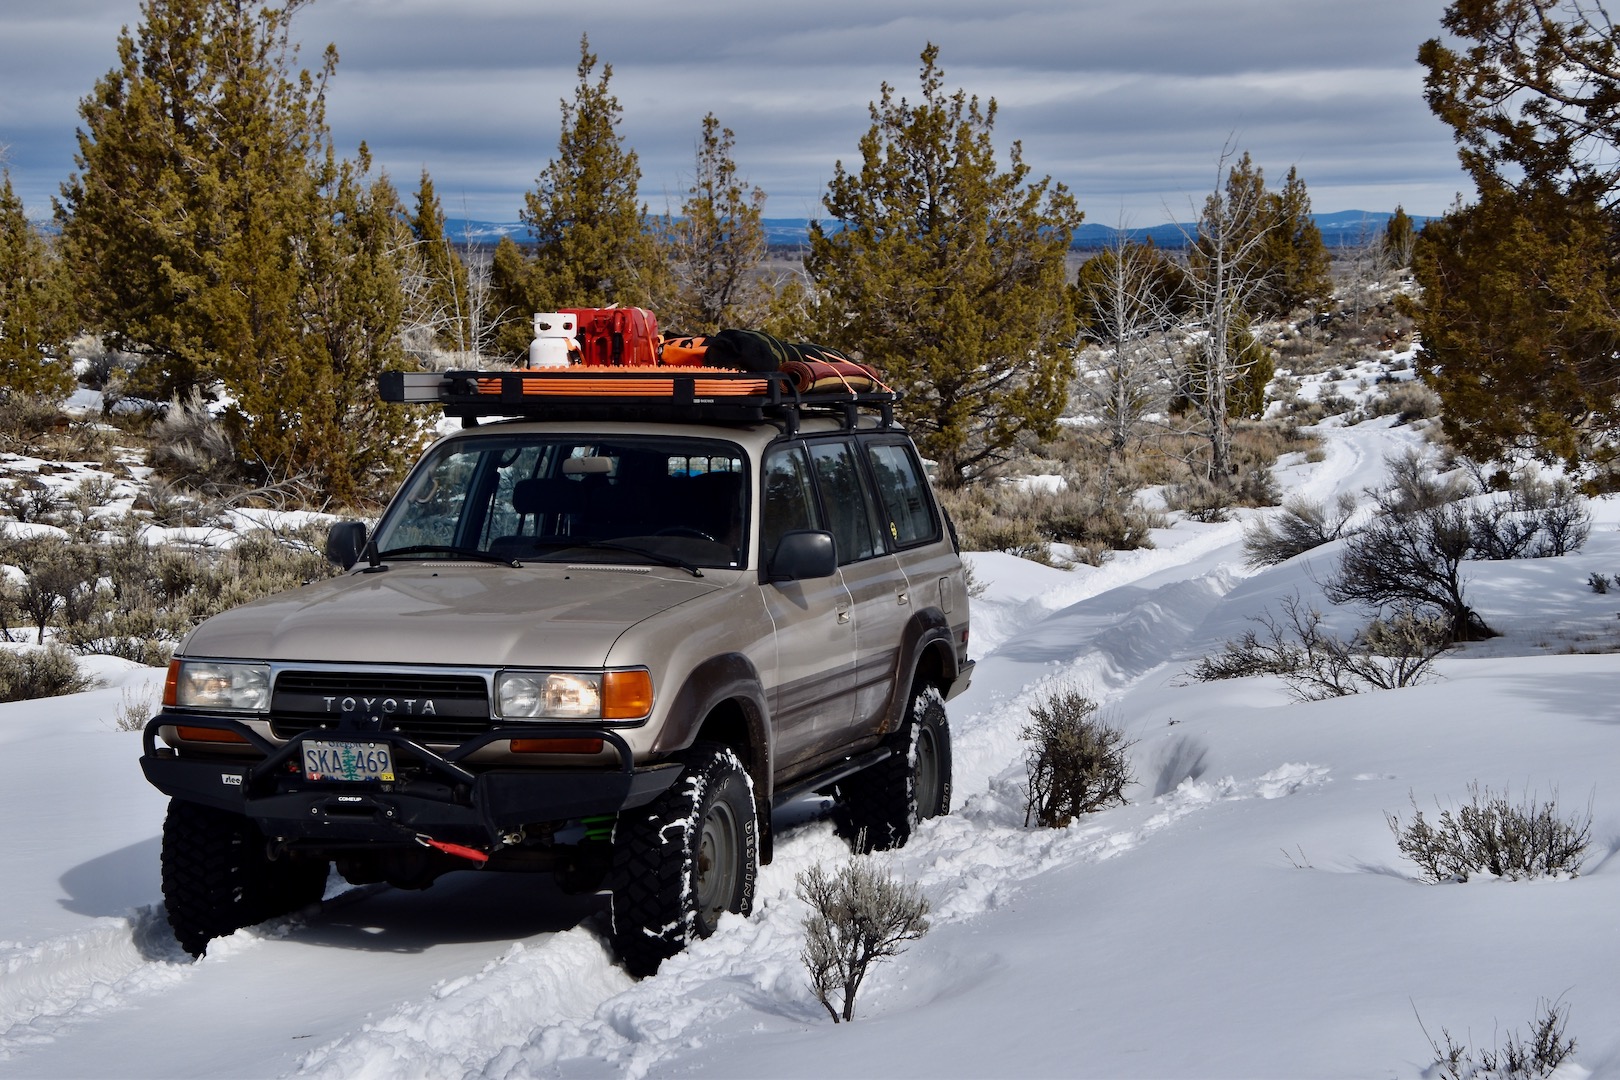 A Toyota Land Cruiser (80-series) stops for rest in a snowy forest